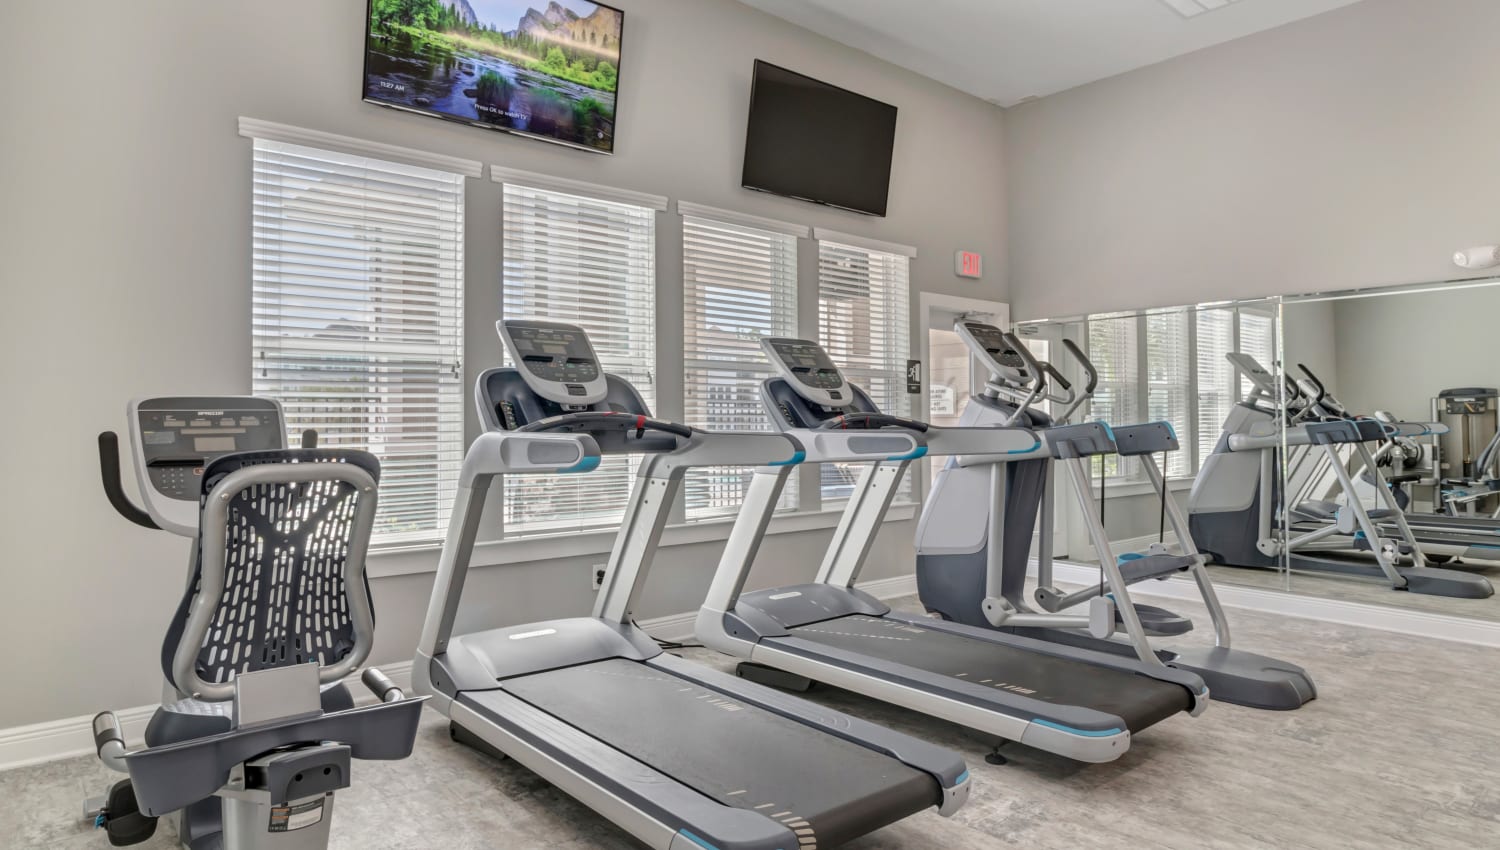 Treadmills in the fitness center at The Carlton at Bartram Park in Jacksonville, Florida